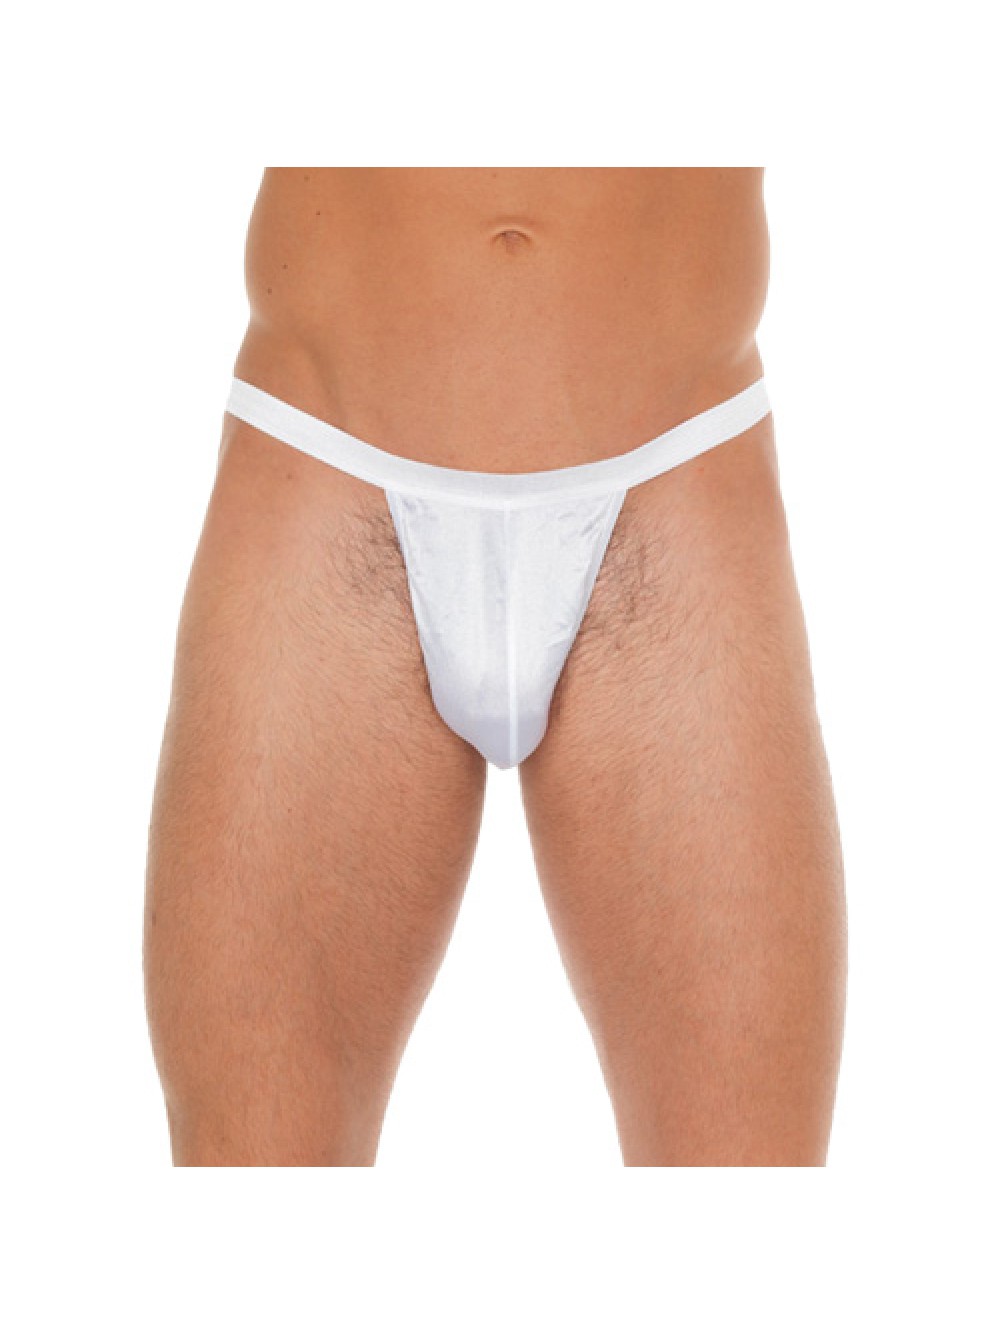 Mens White G-String With Small White Pouch 8718924223604